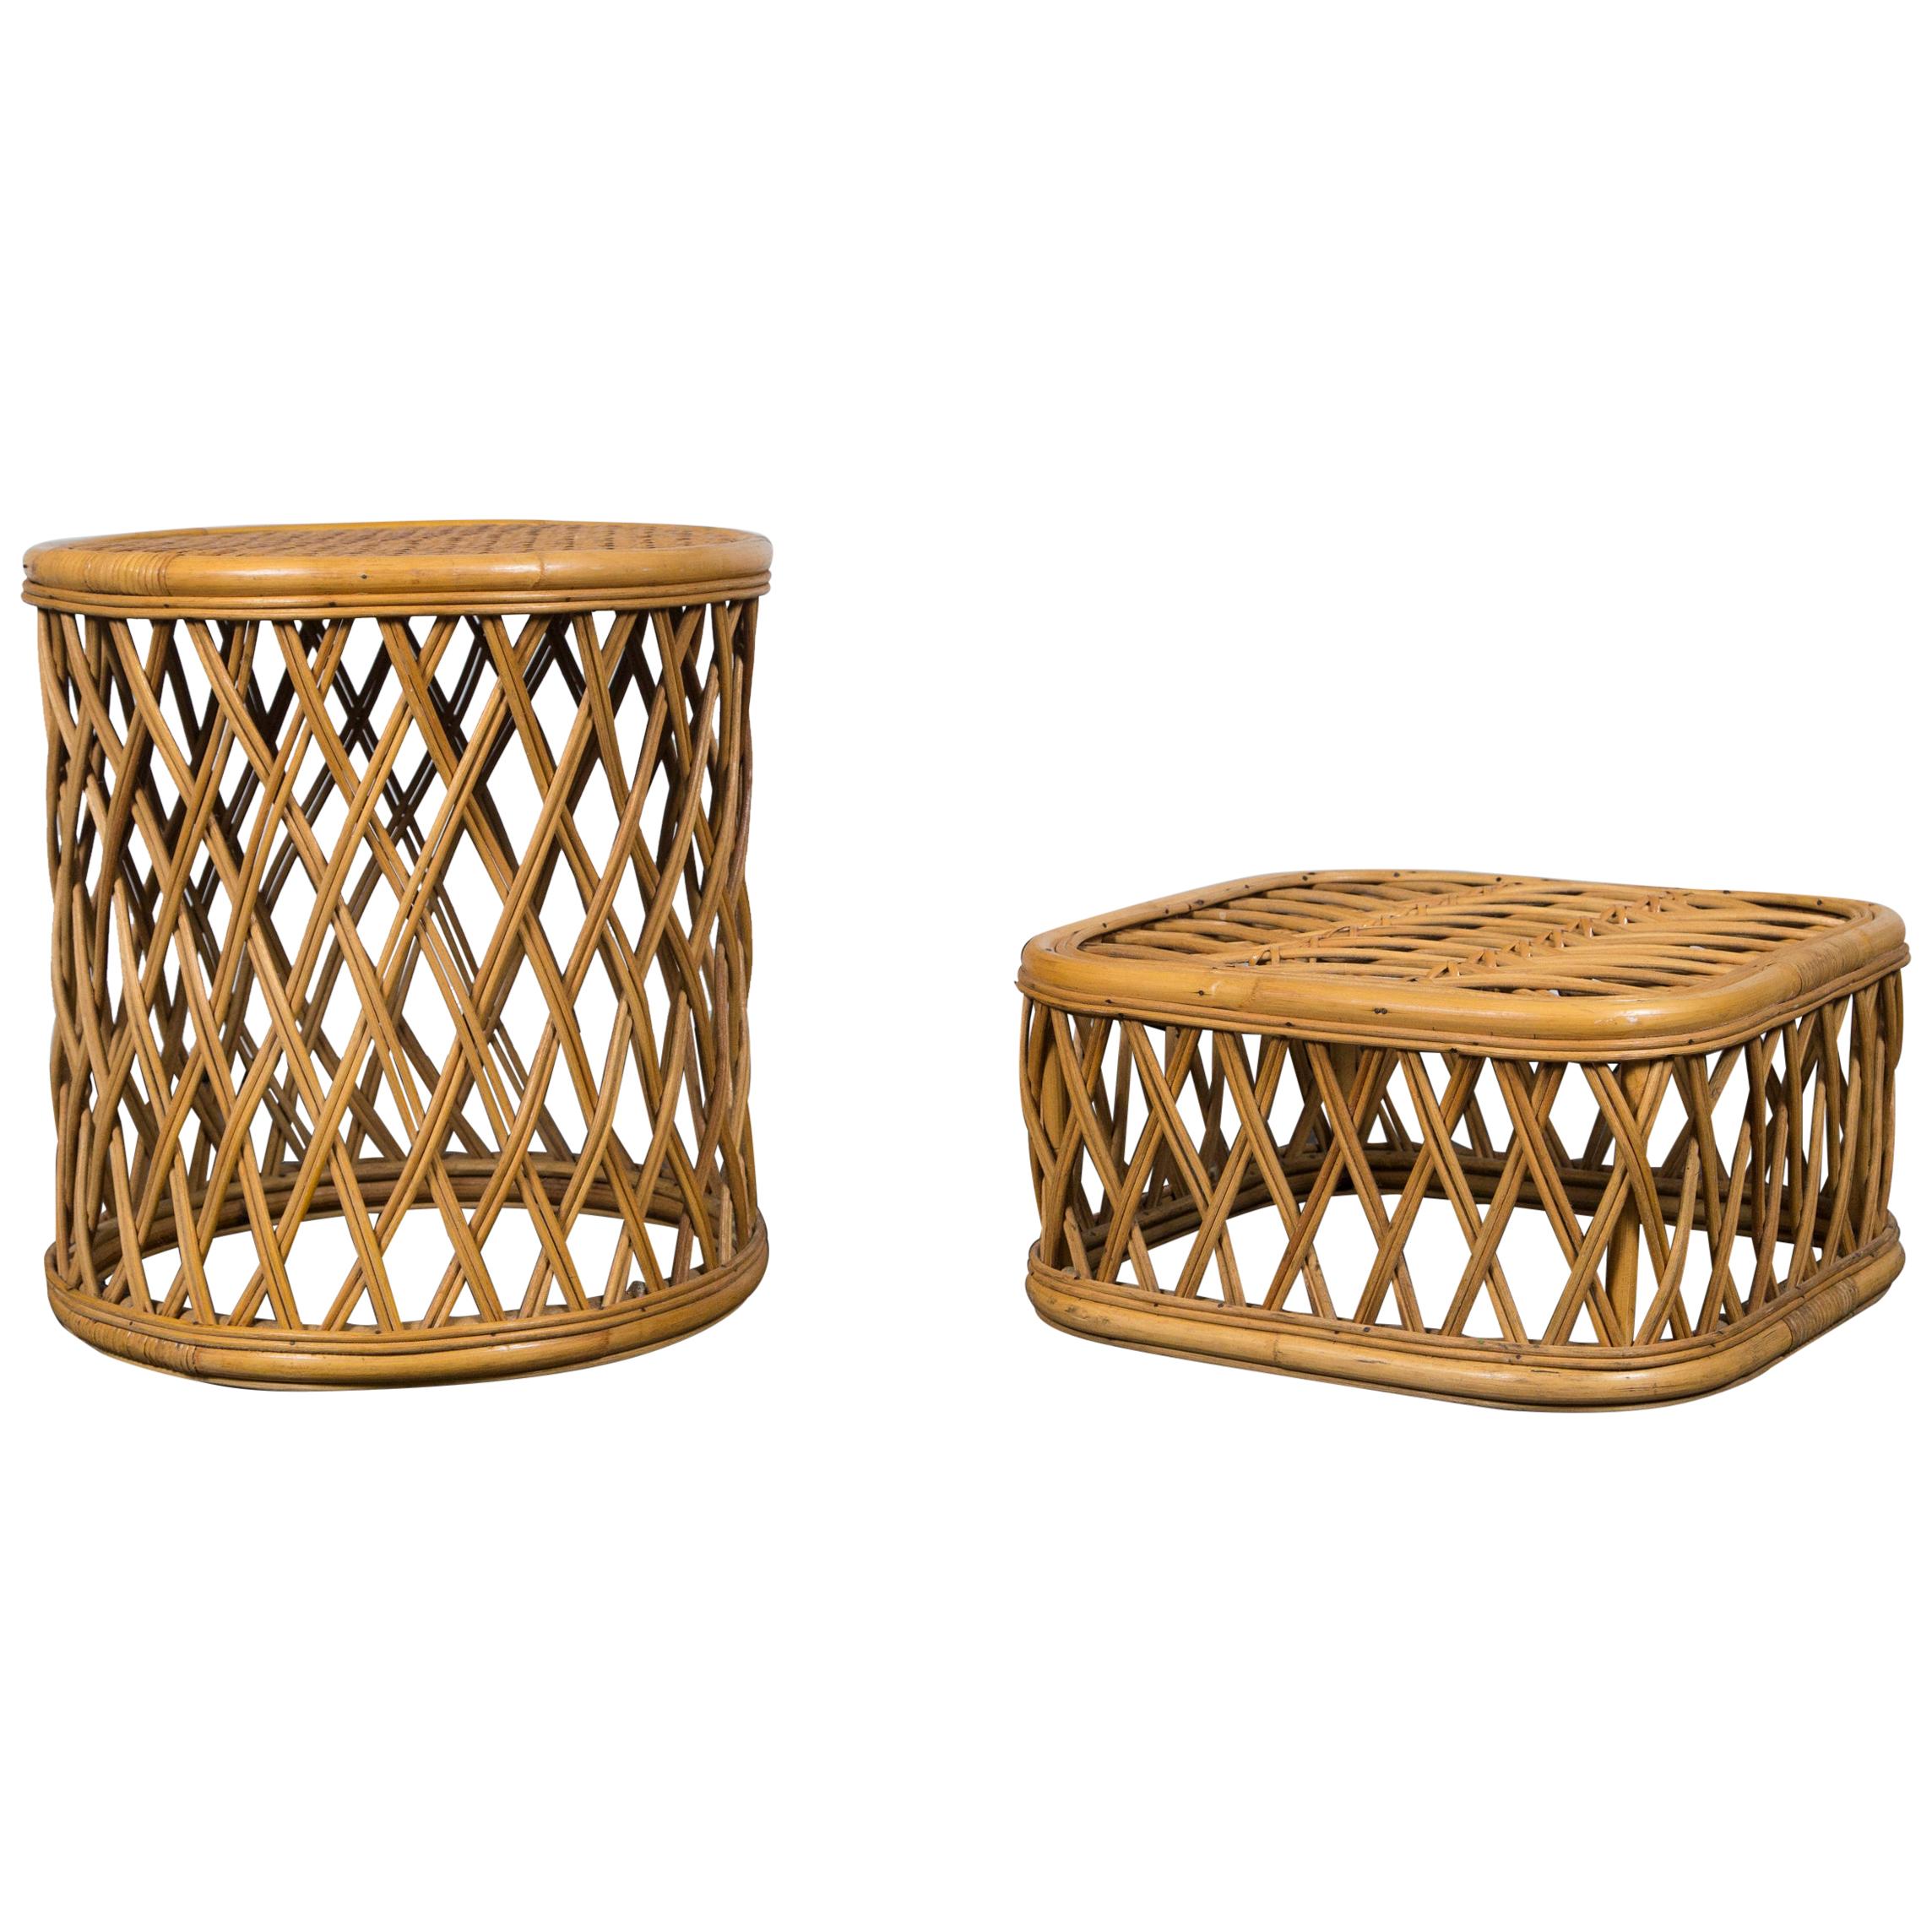 Two Rattan Pieces Small Cylindrical Table, Small Square Ottoman For Sale